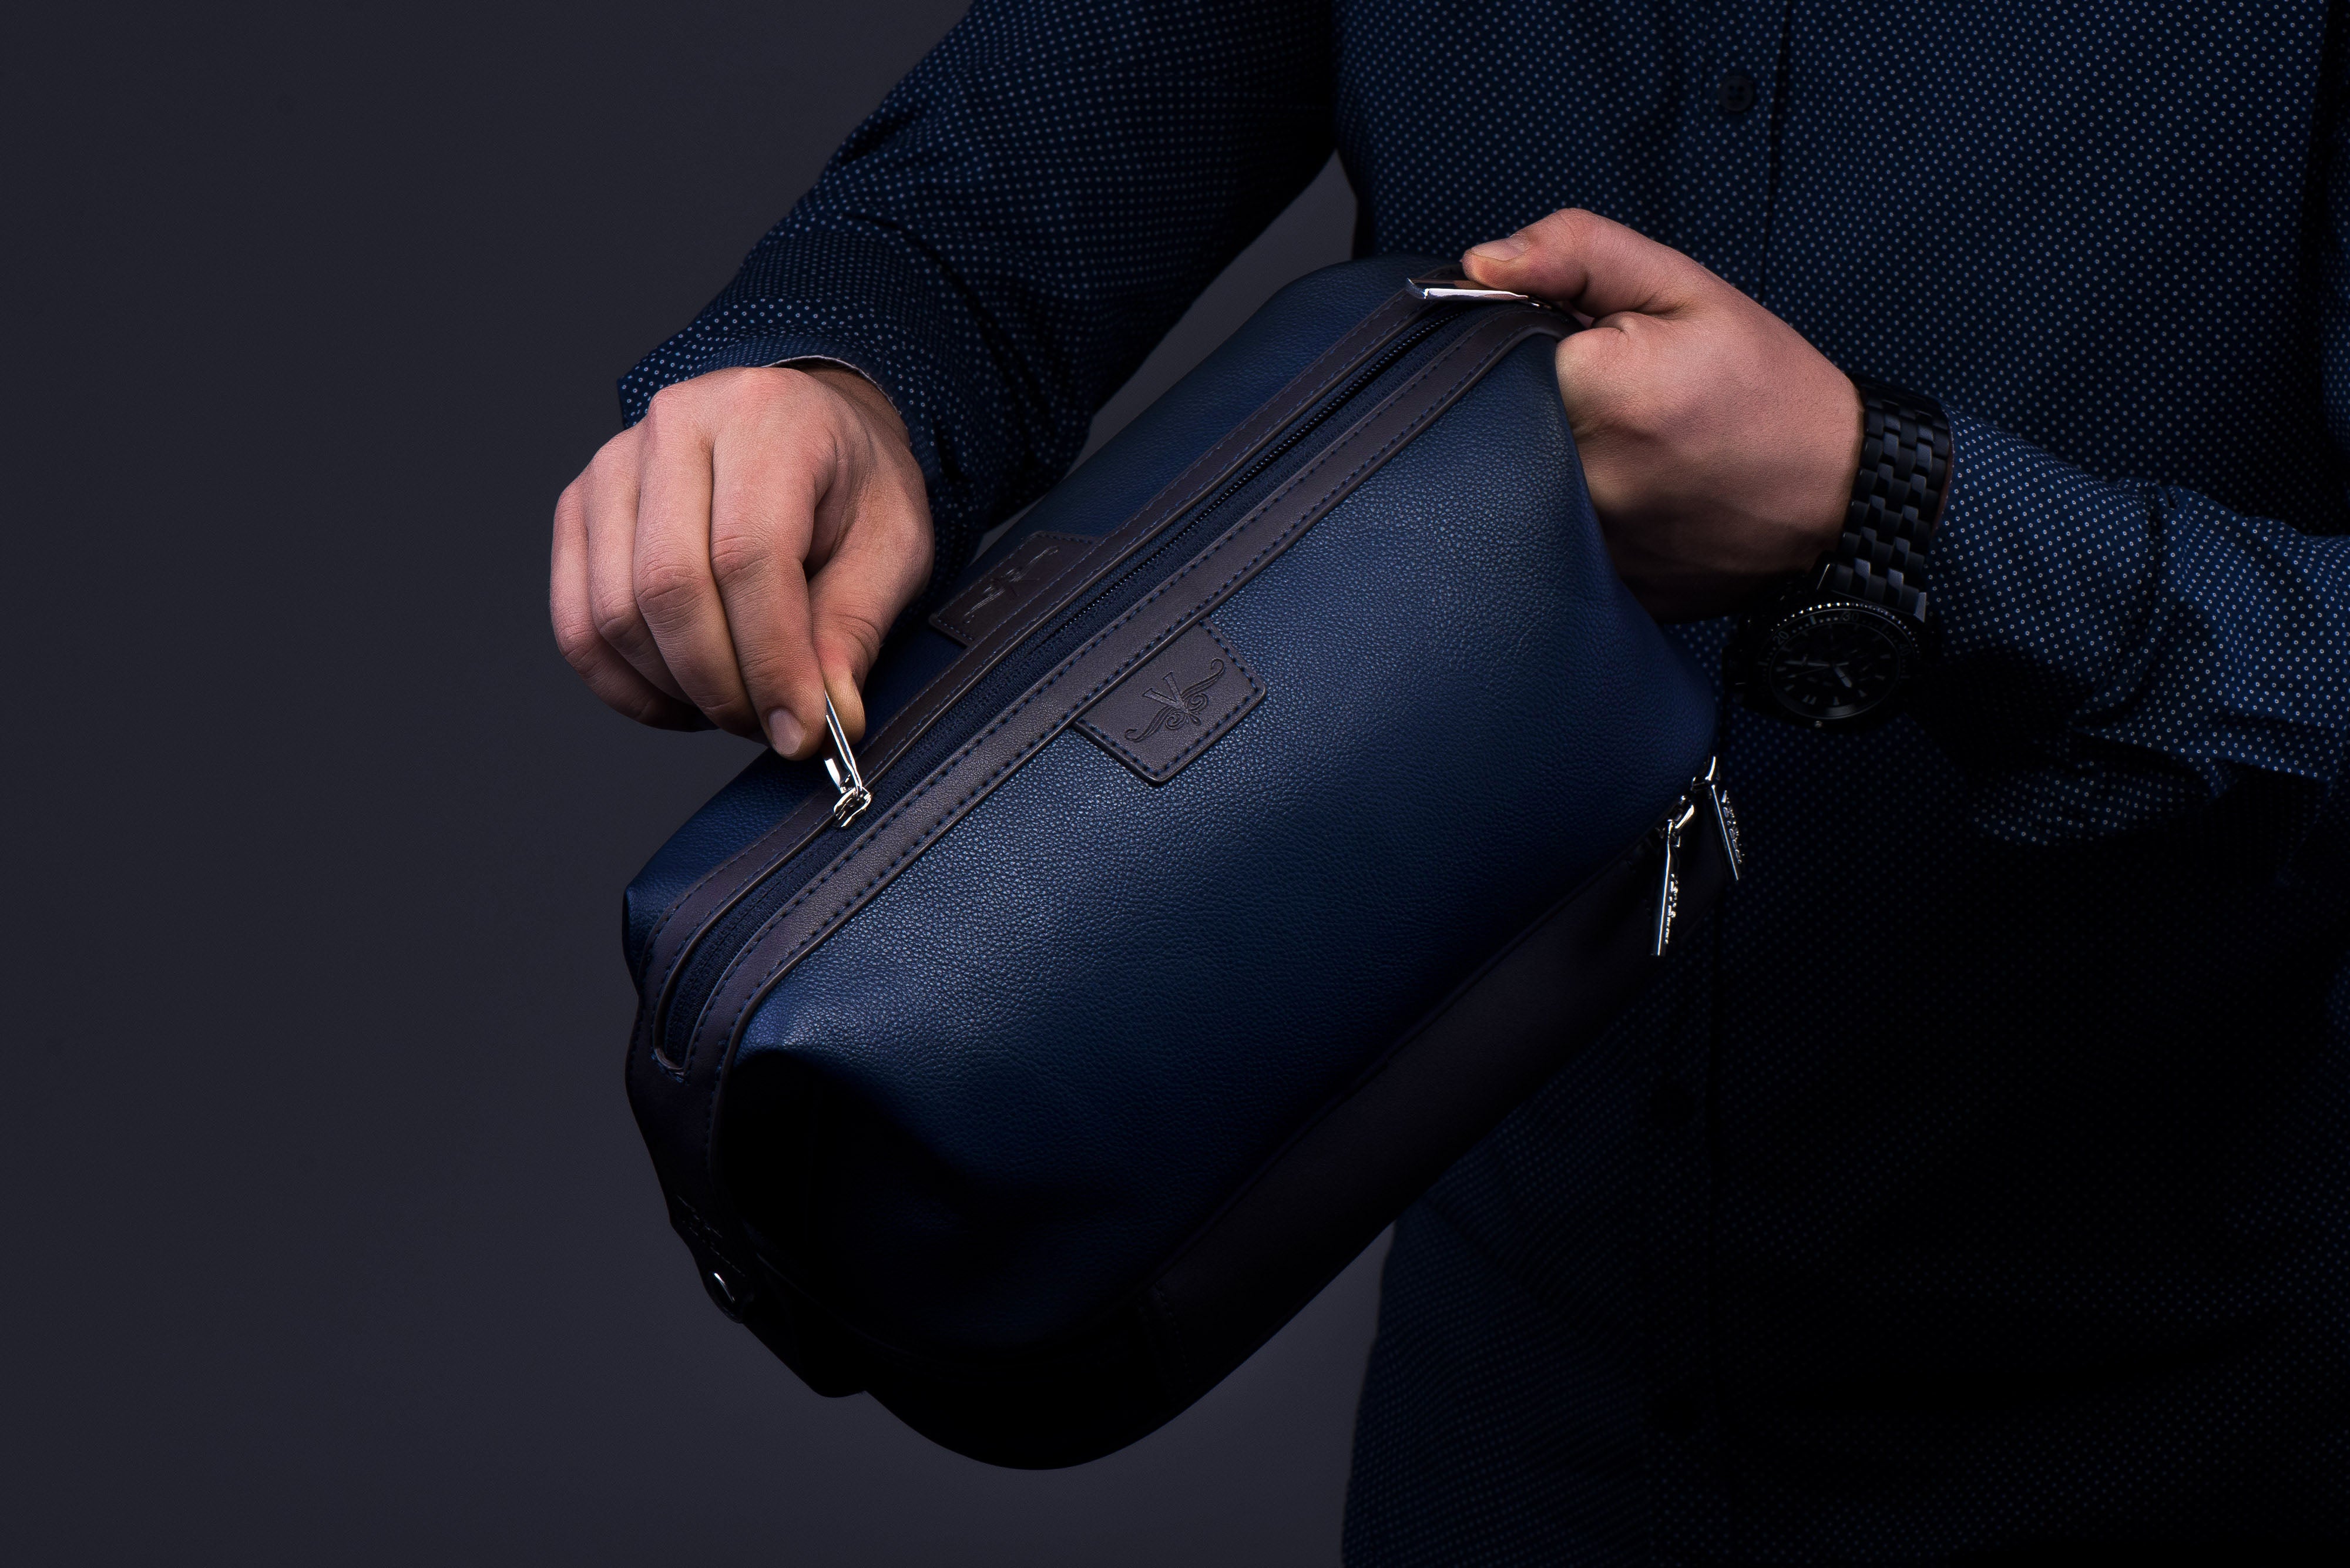 15 Best Men's Toiletry Bags & Dopp Kits in 2023, According to Frequent  Travelers